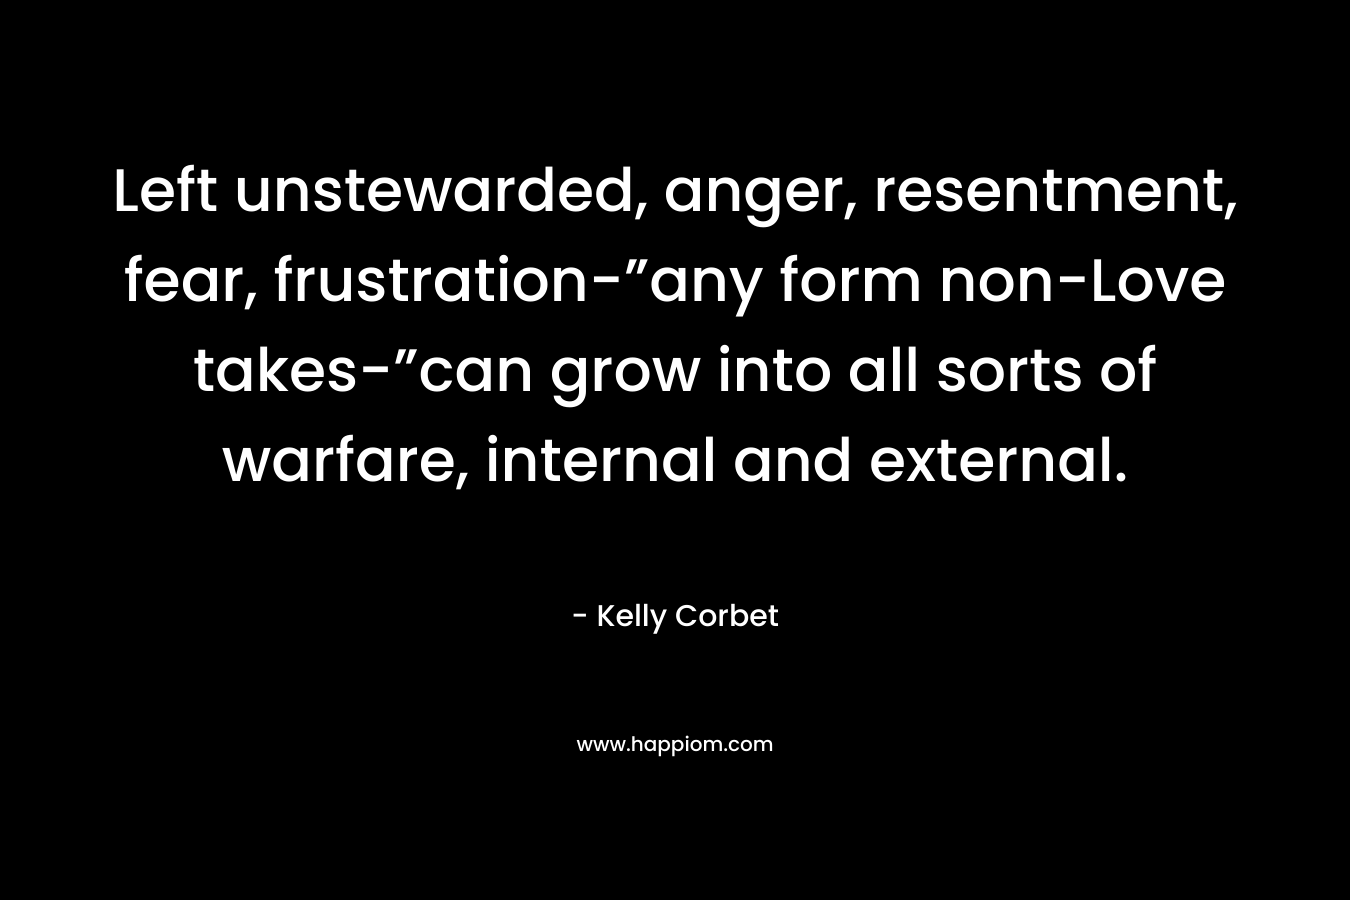 Left unstewarded, anger, resentment, fear, frustration-”any form non-Love takes-”can grow into all sorts of warfare, internal and external.